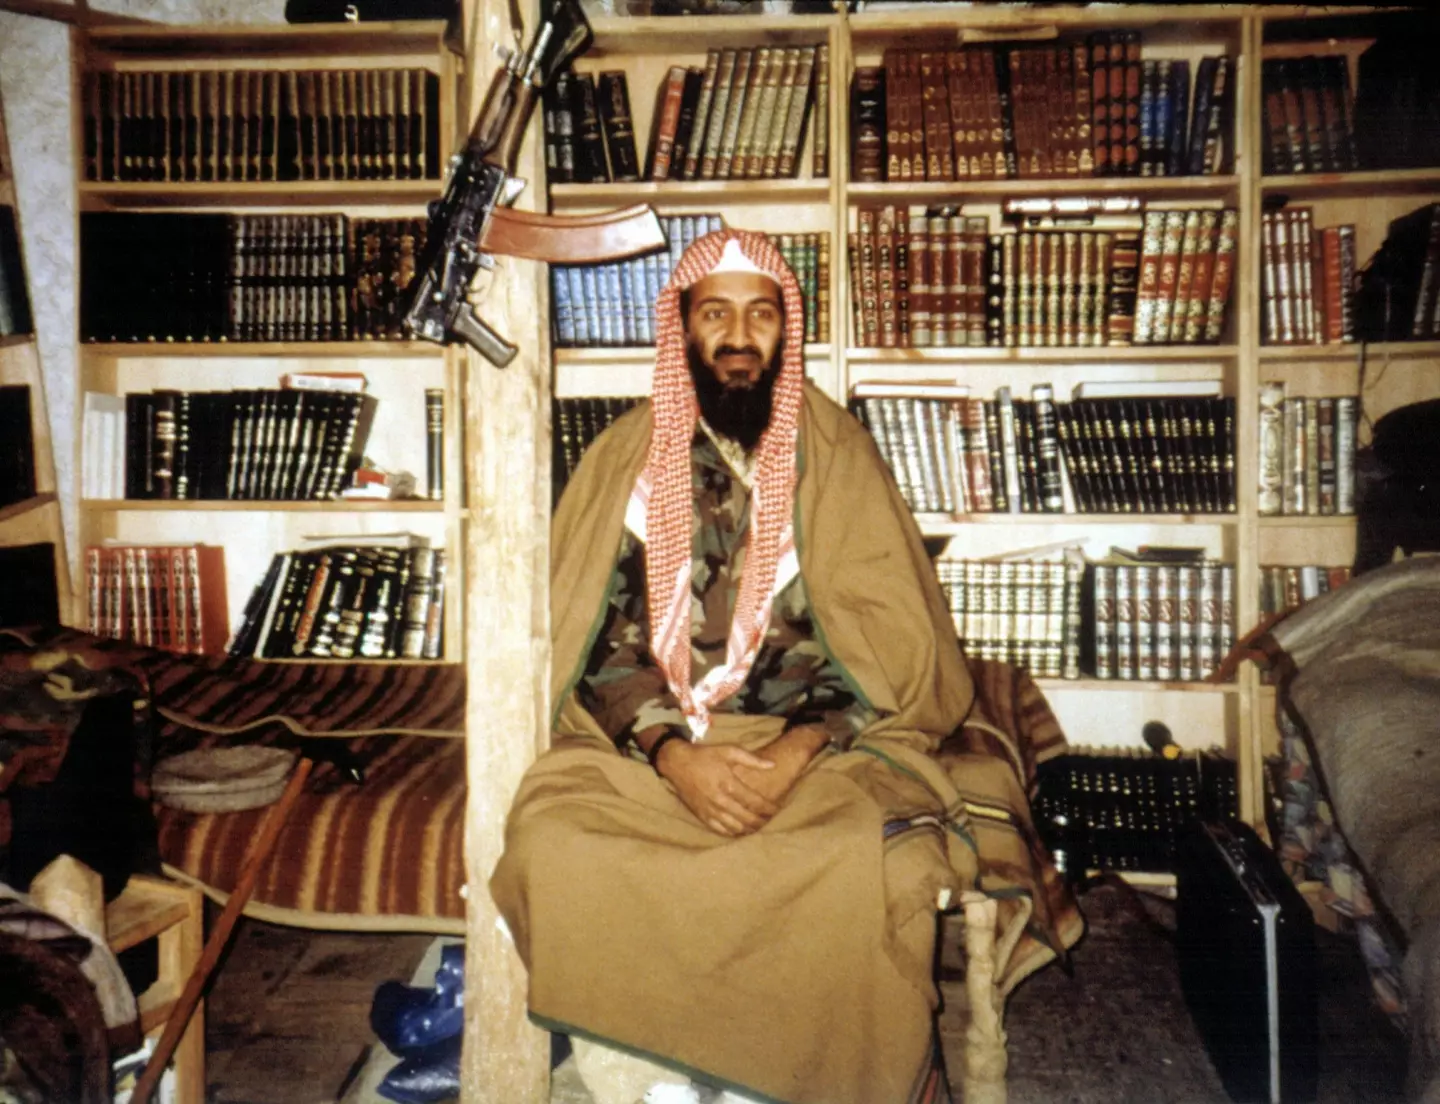 Bin Laden was the most wanted terrorist in the world.